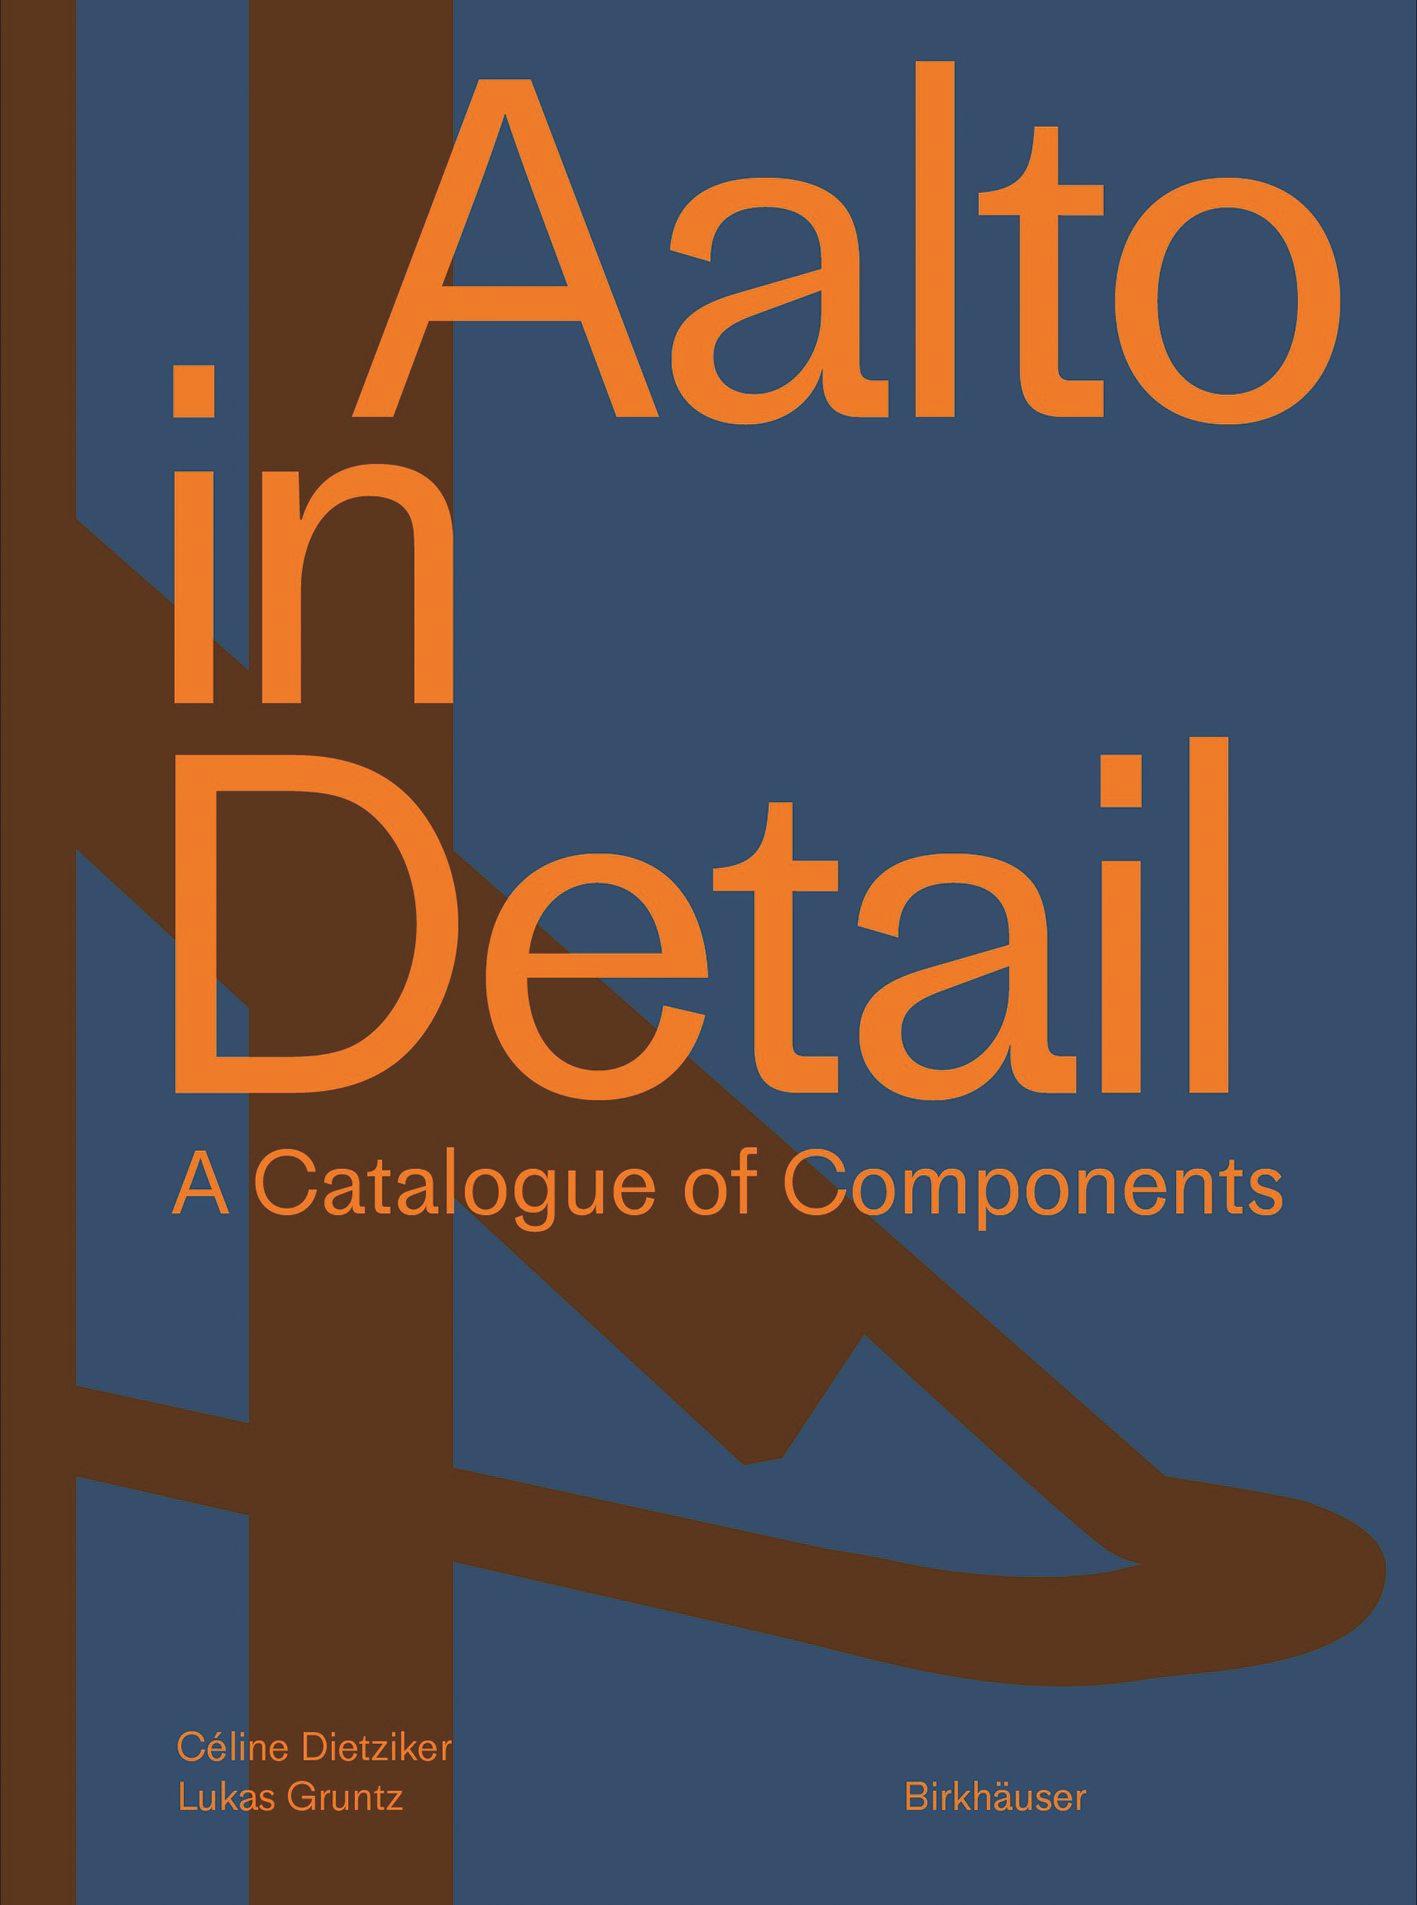 Aalto in Detail's cover